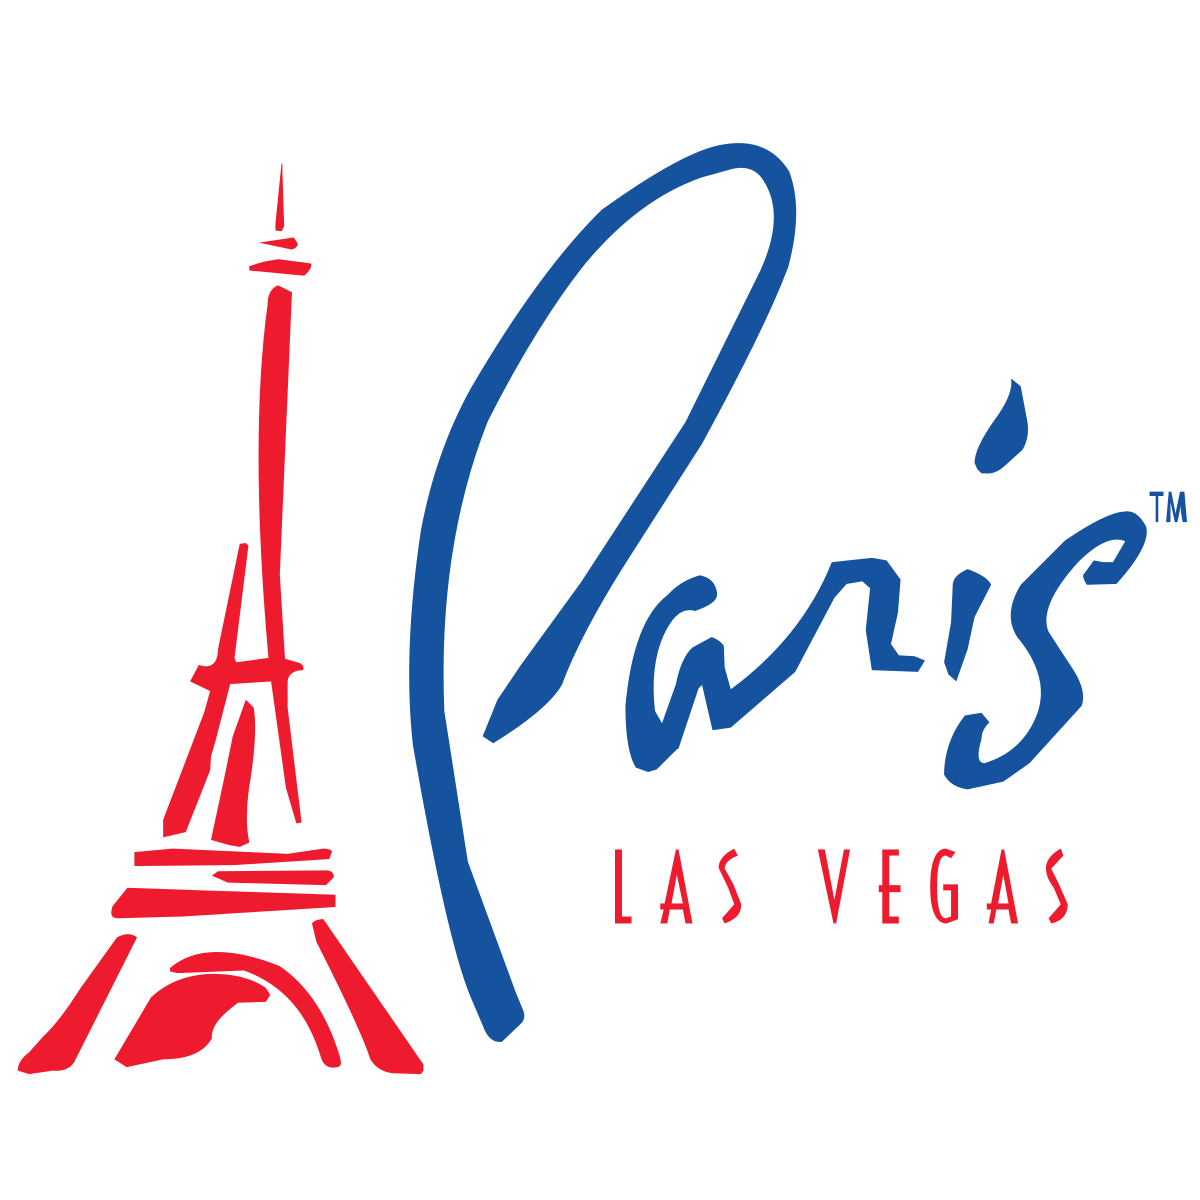 las vegas clipart welcome to fabulous